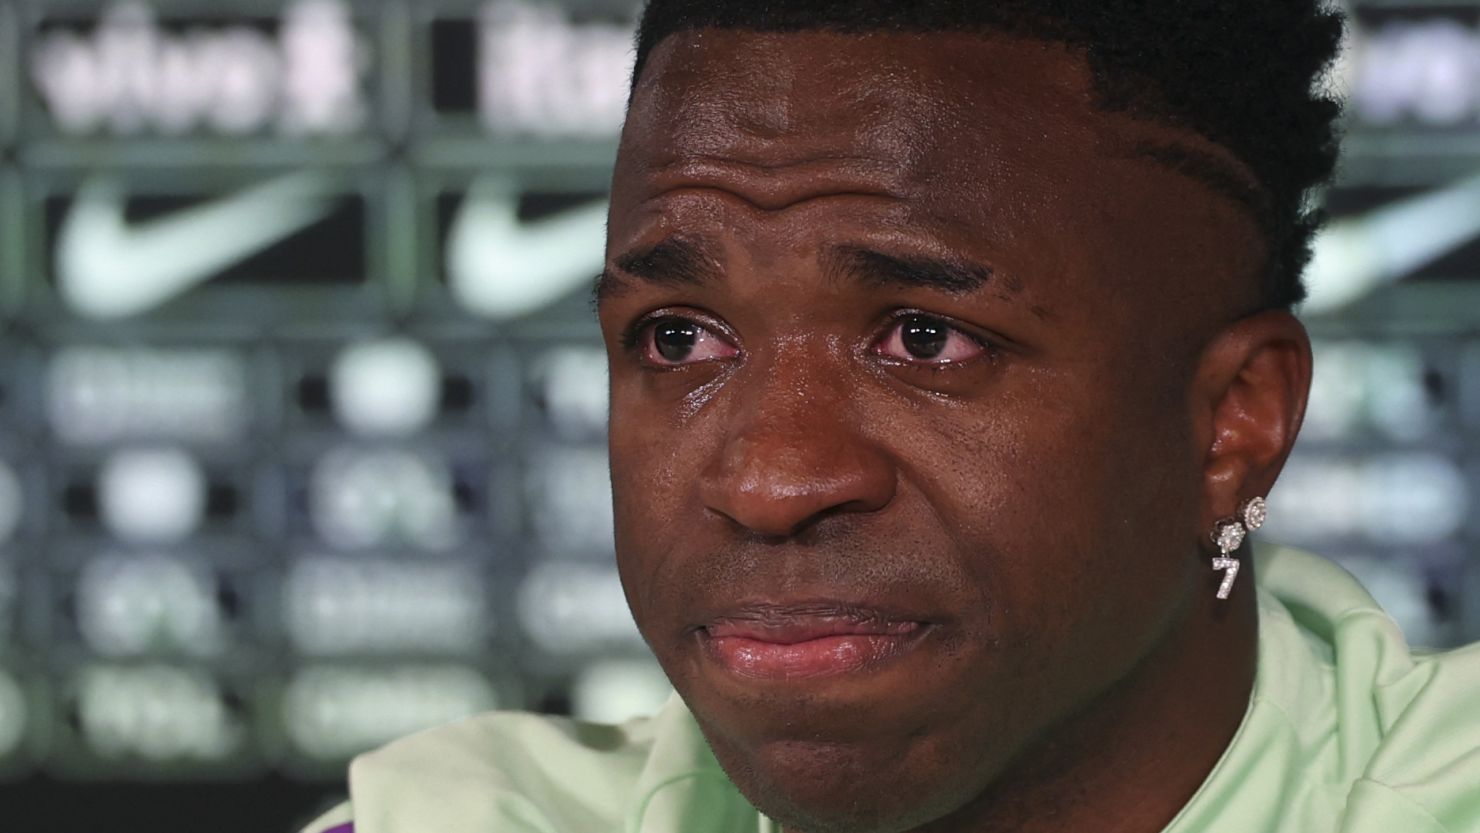 Vinícius broke down in tears during a press conference on Monday.